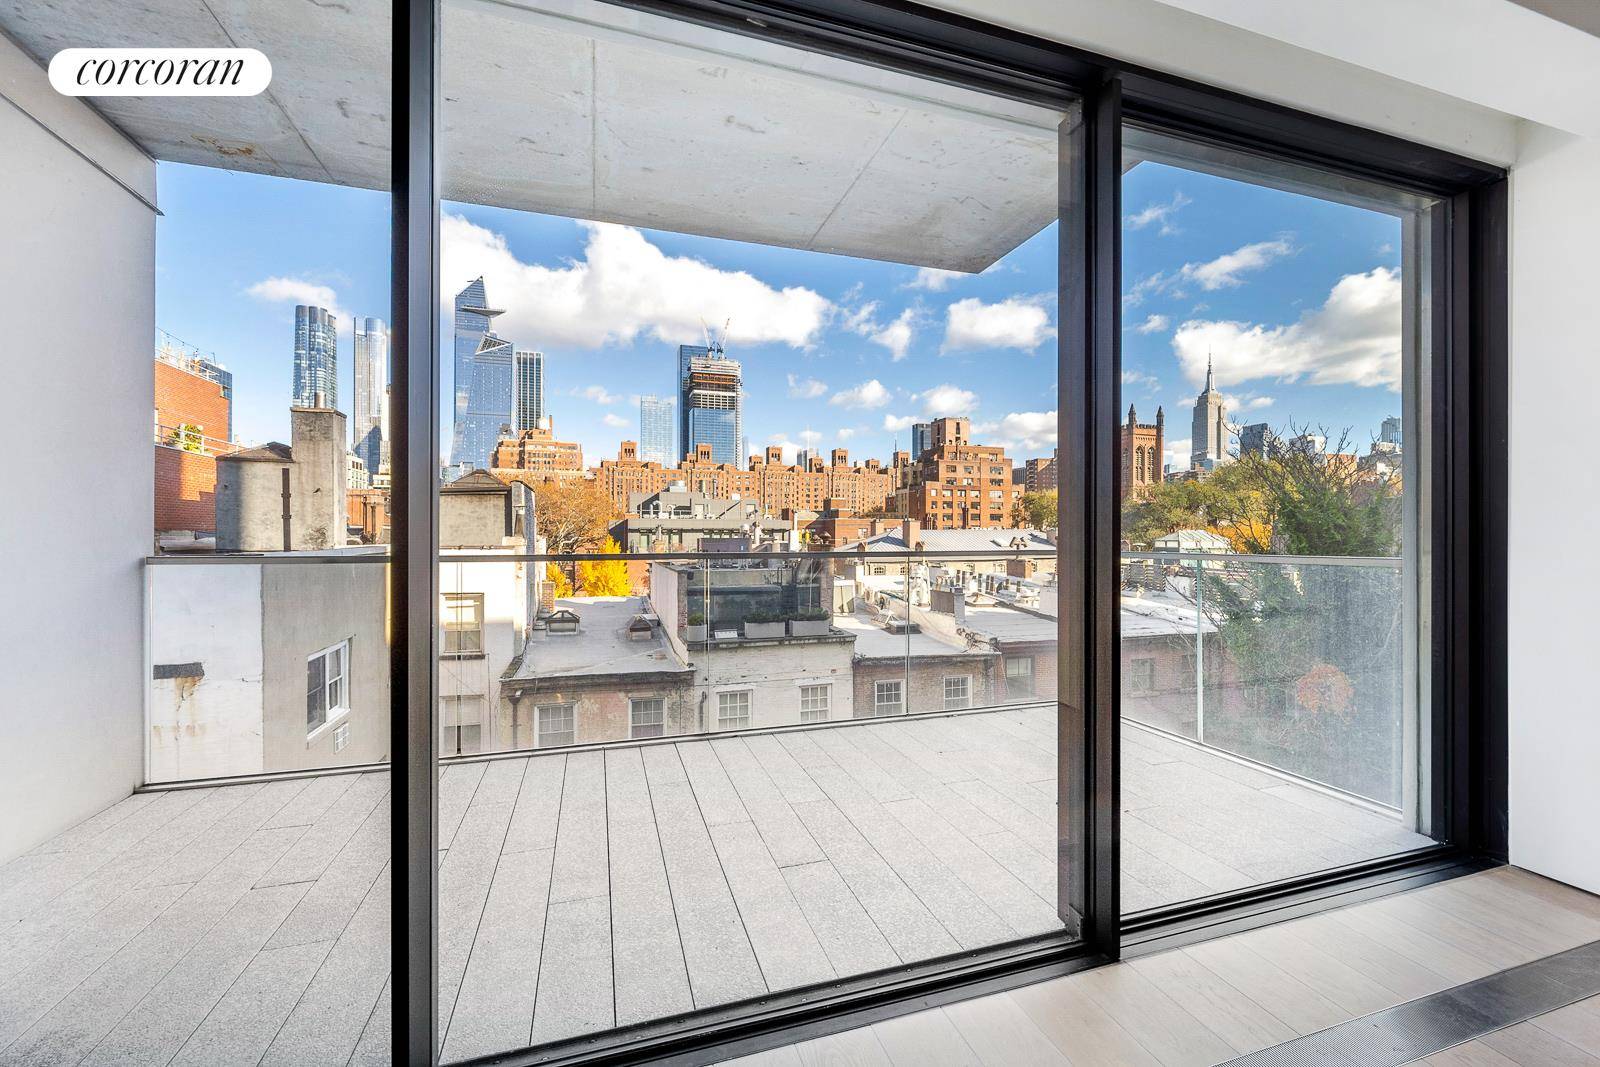 Located on the most prime West Chelsea block, live in the most bespoke 2 bed, 2.